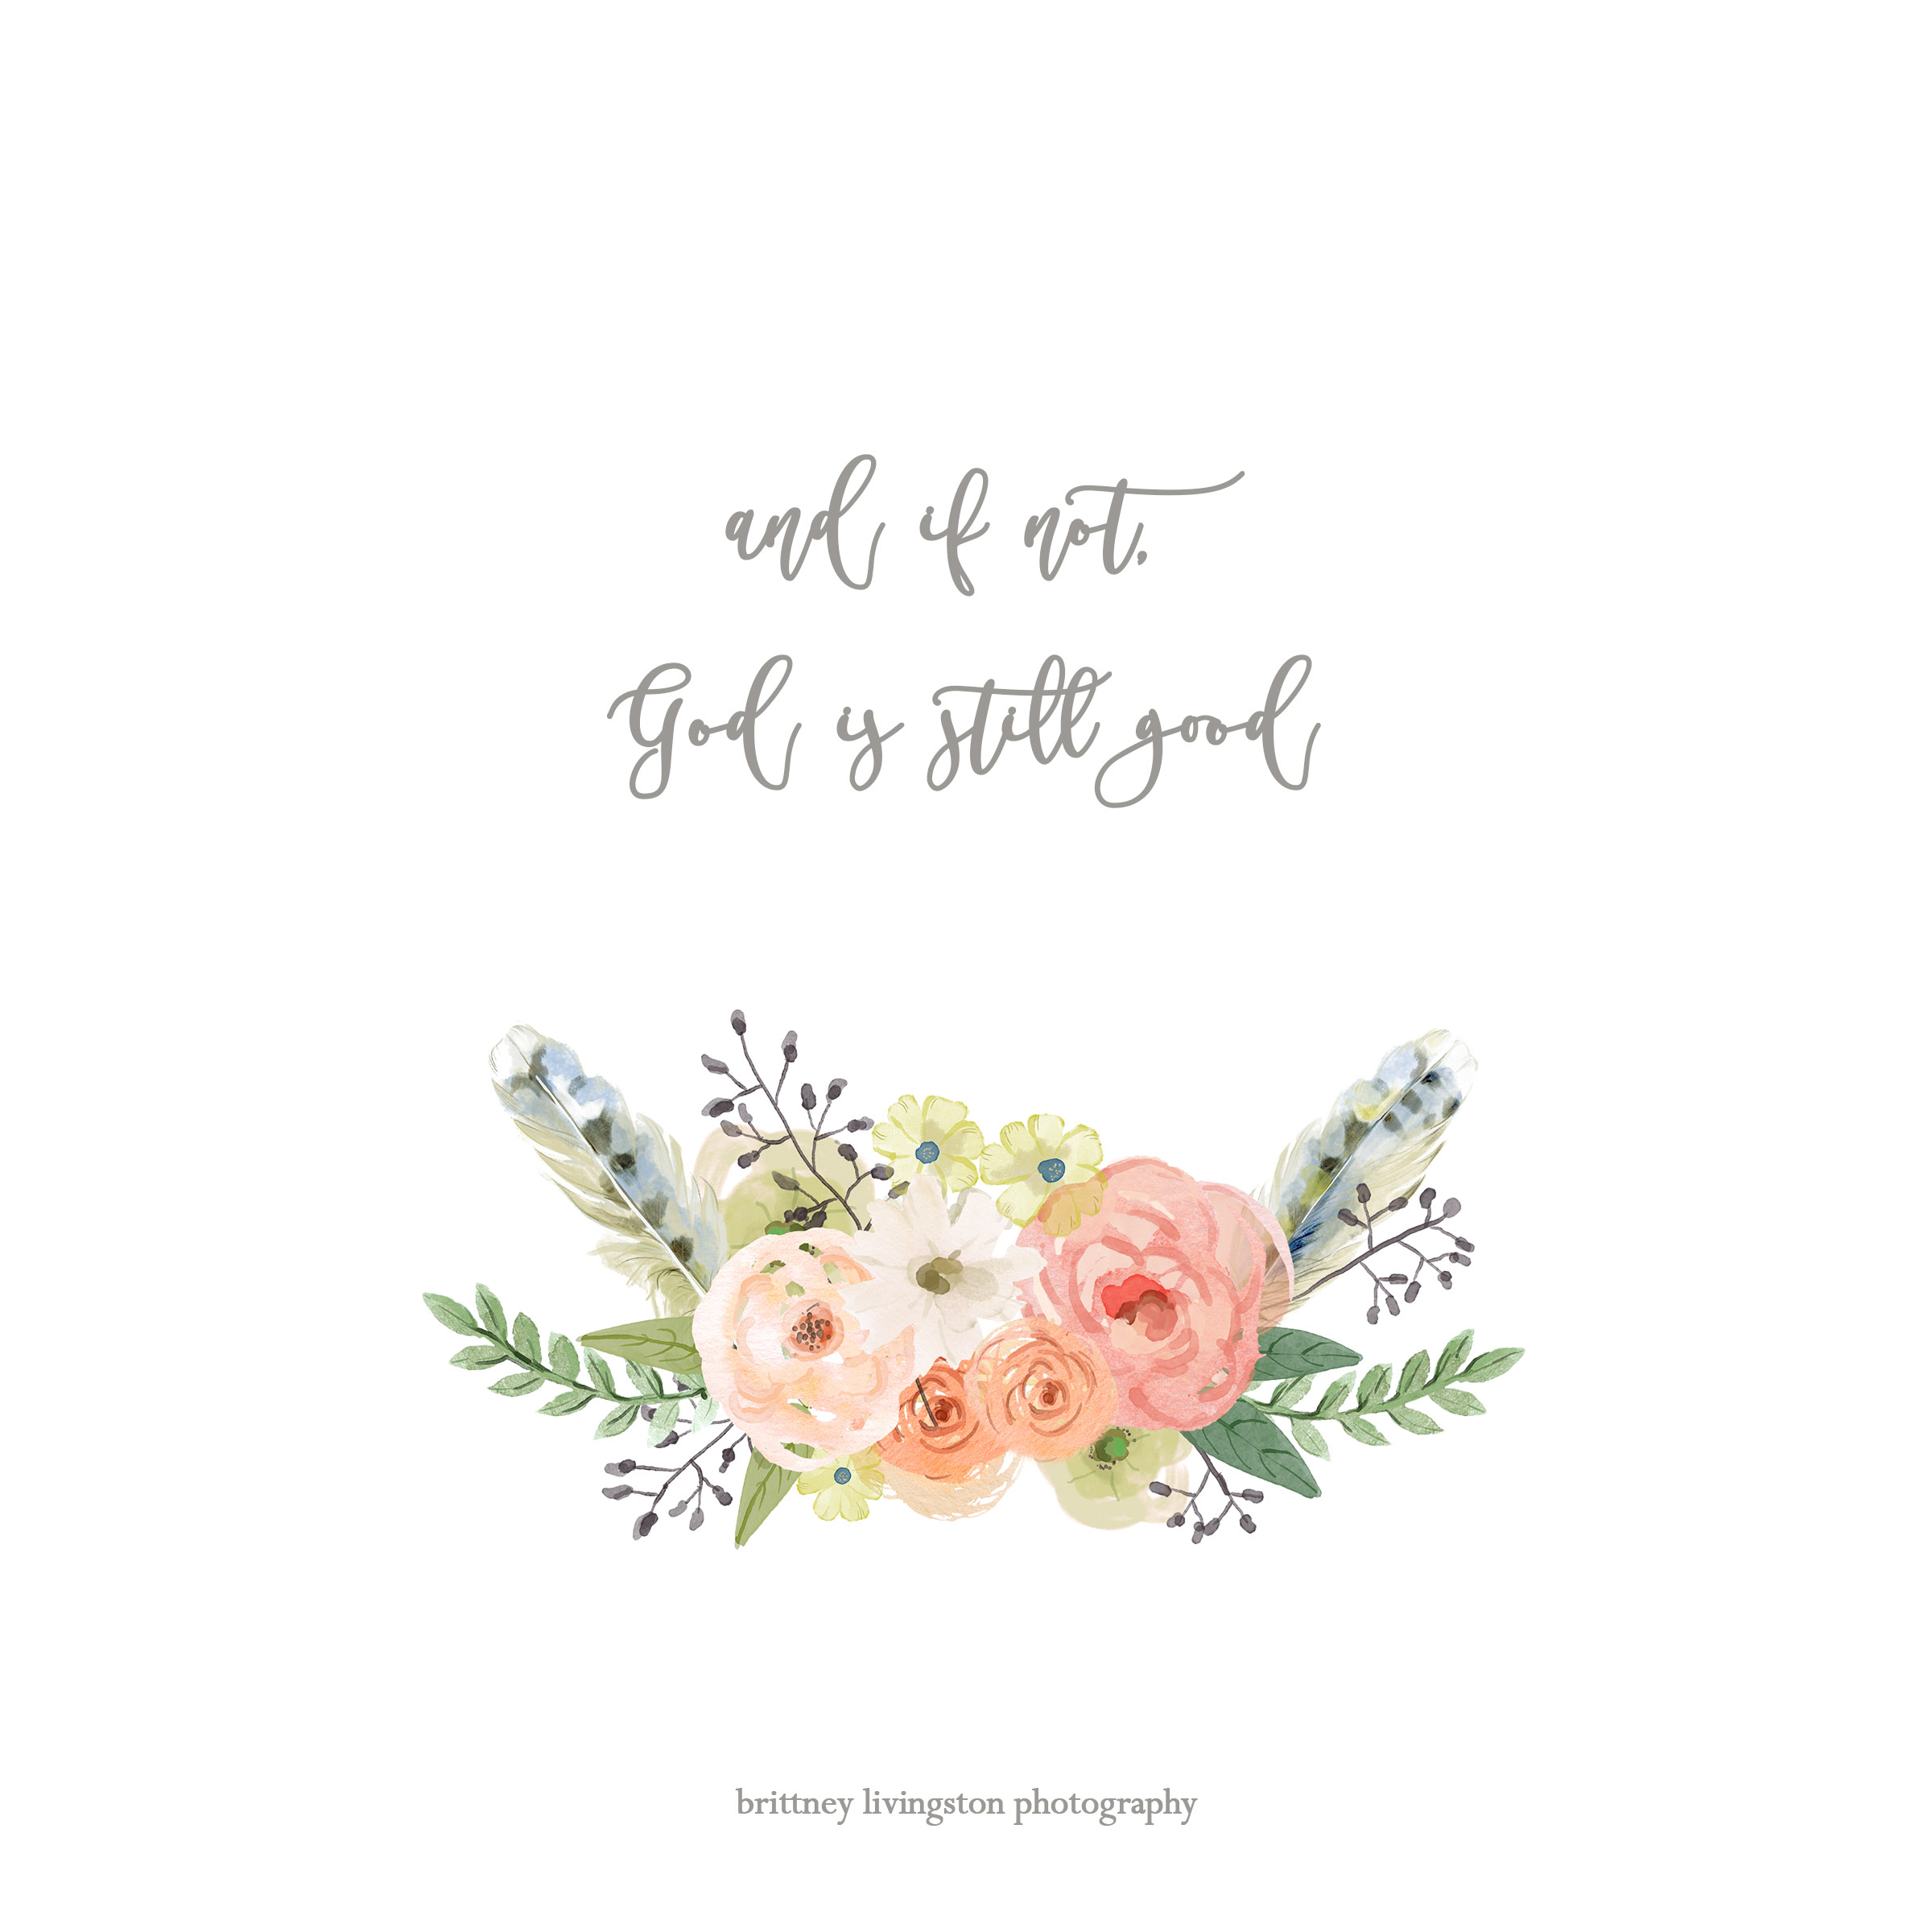 and if not, God is still good | Brittney Livingston Photography